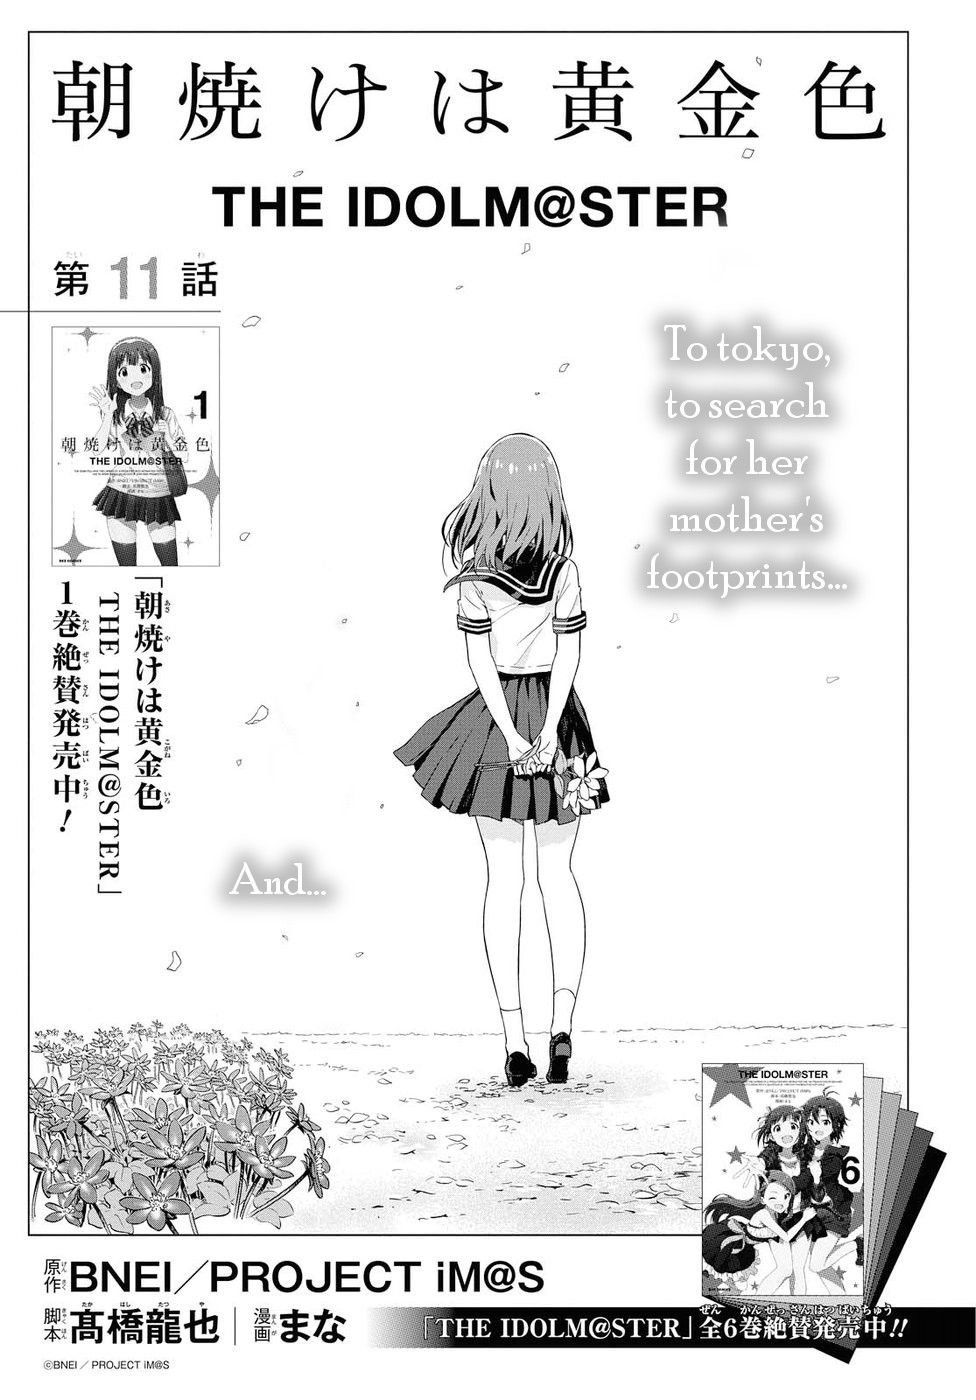 THE iDOLM@STER: Asayake wa Koganeiro Ch. 11 To Tokyo, to search for her mother's footprints... And...